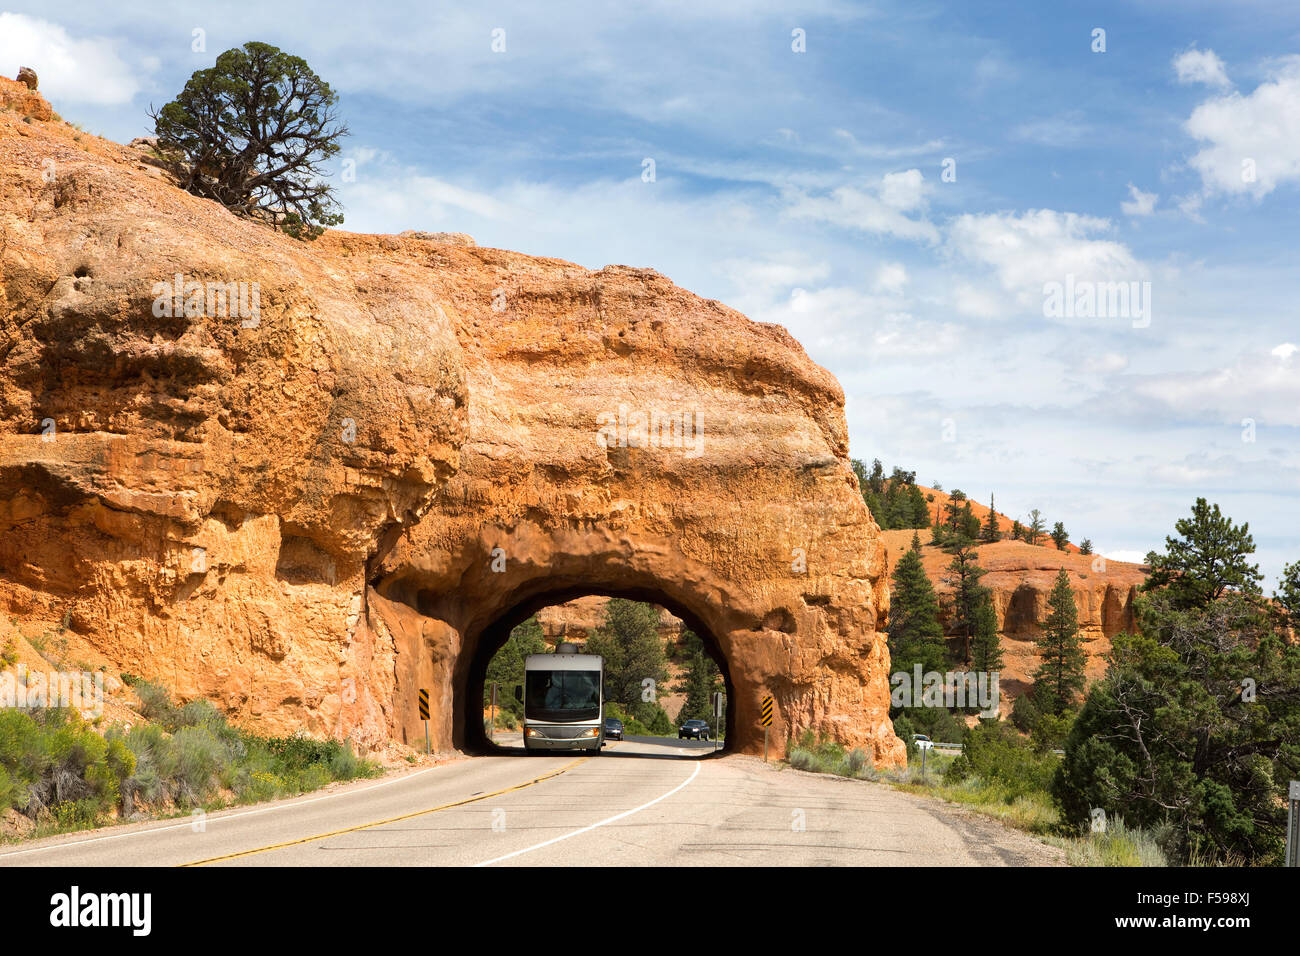 A recreational vehicle RV travels through a tunnel in Red Canyon in Dixie National Forest, Utah. Stock Photo